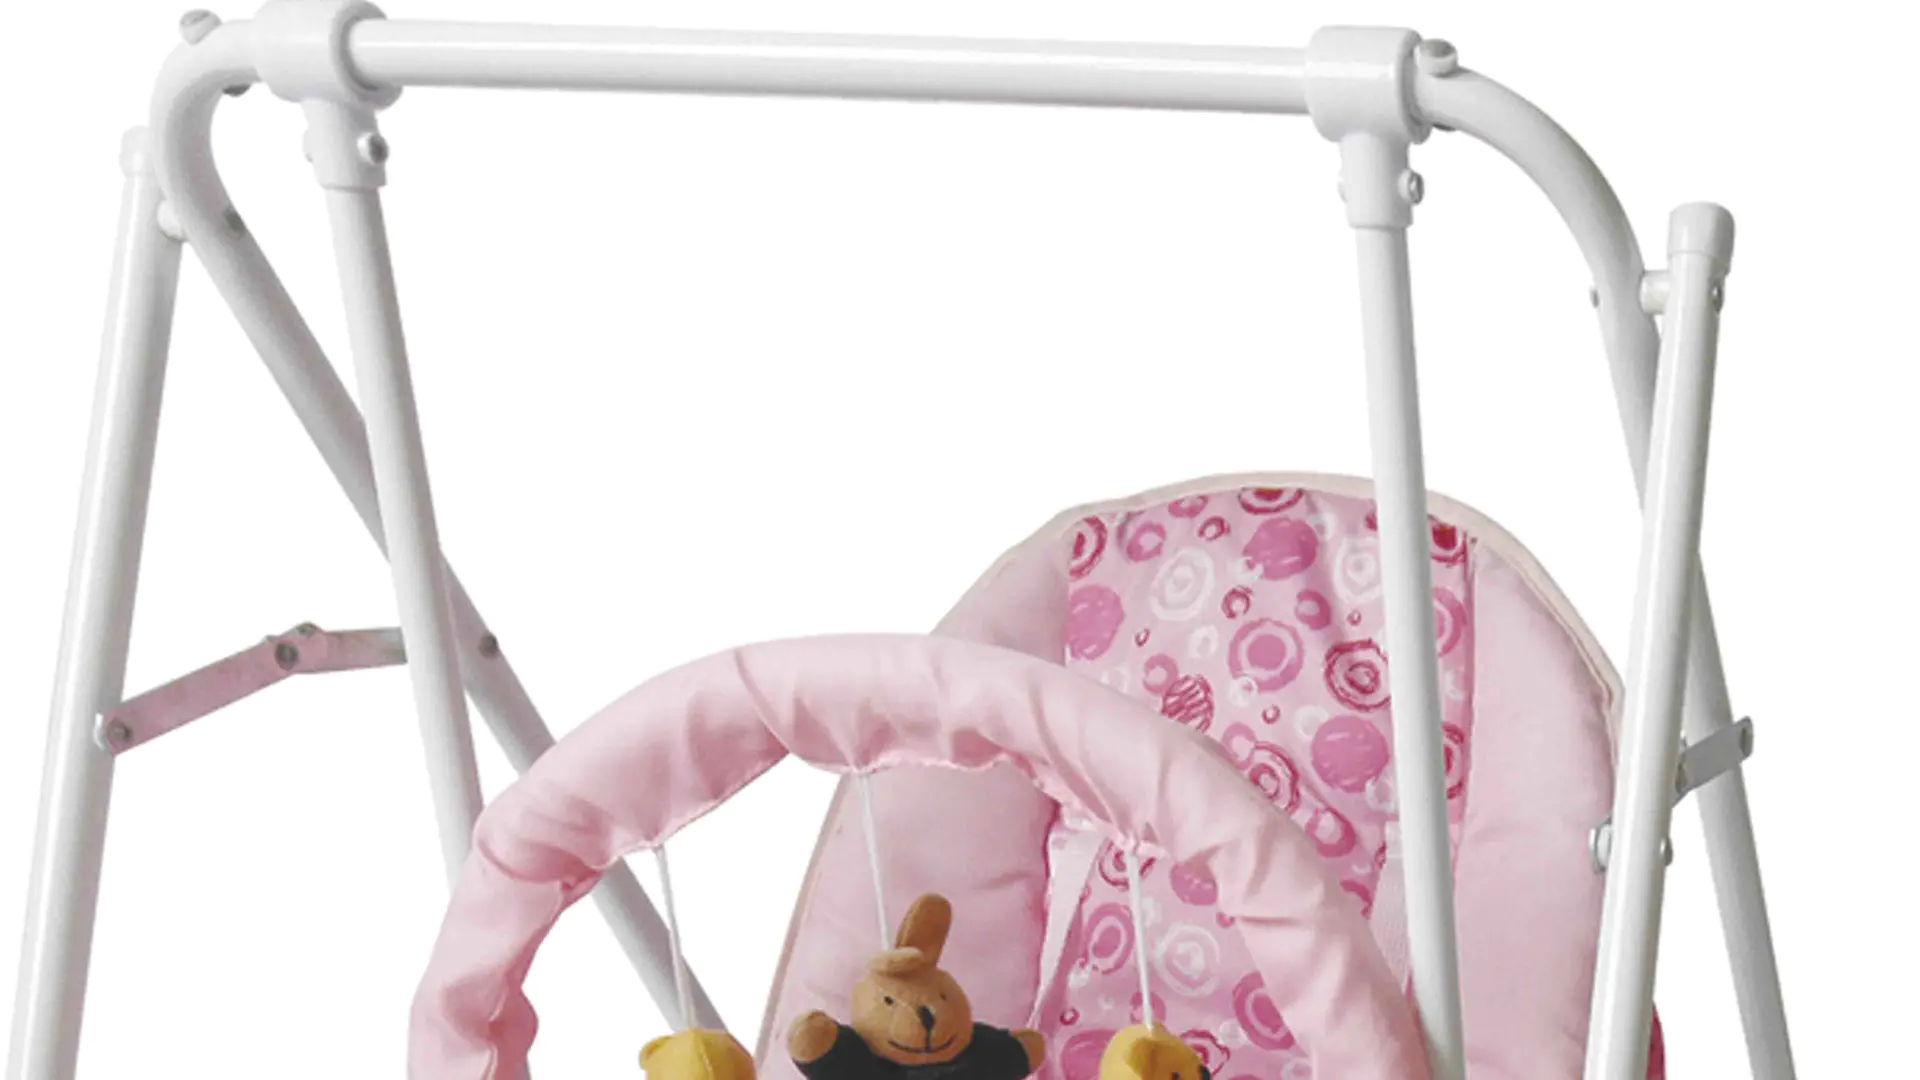 portable safe stable Aoqi Brand baby swing chair online manufacture